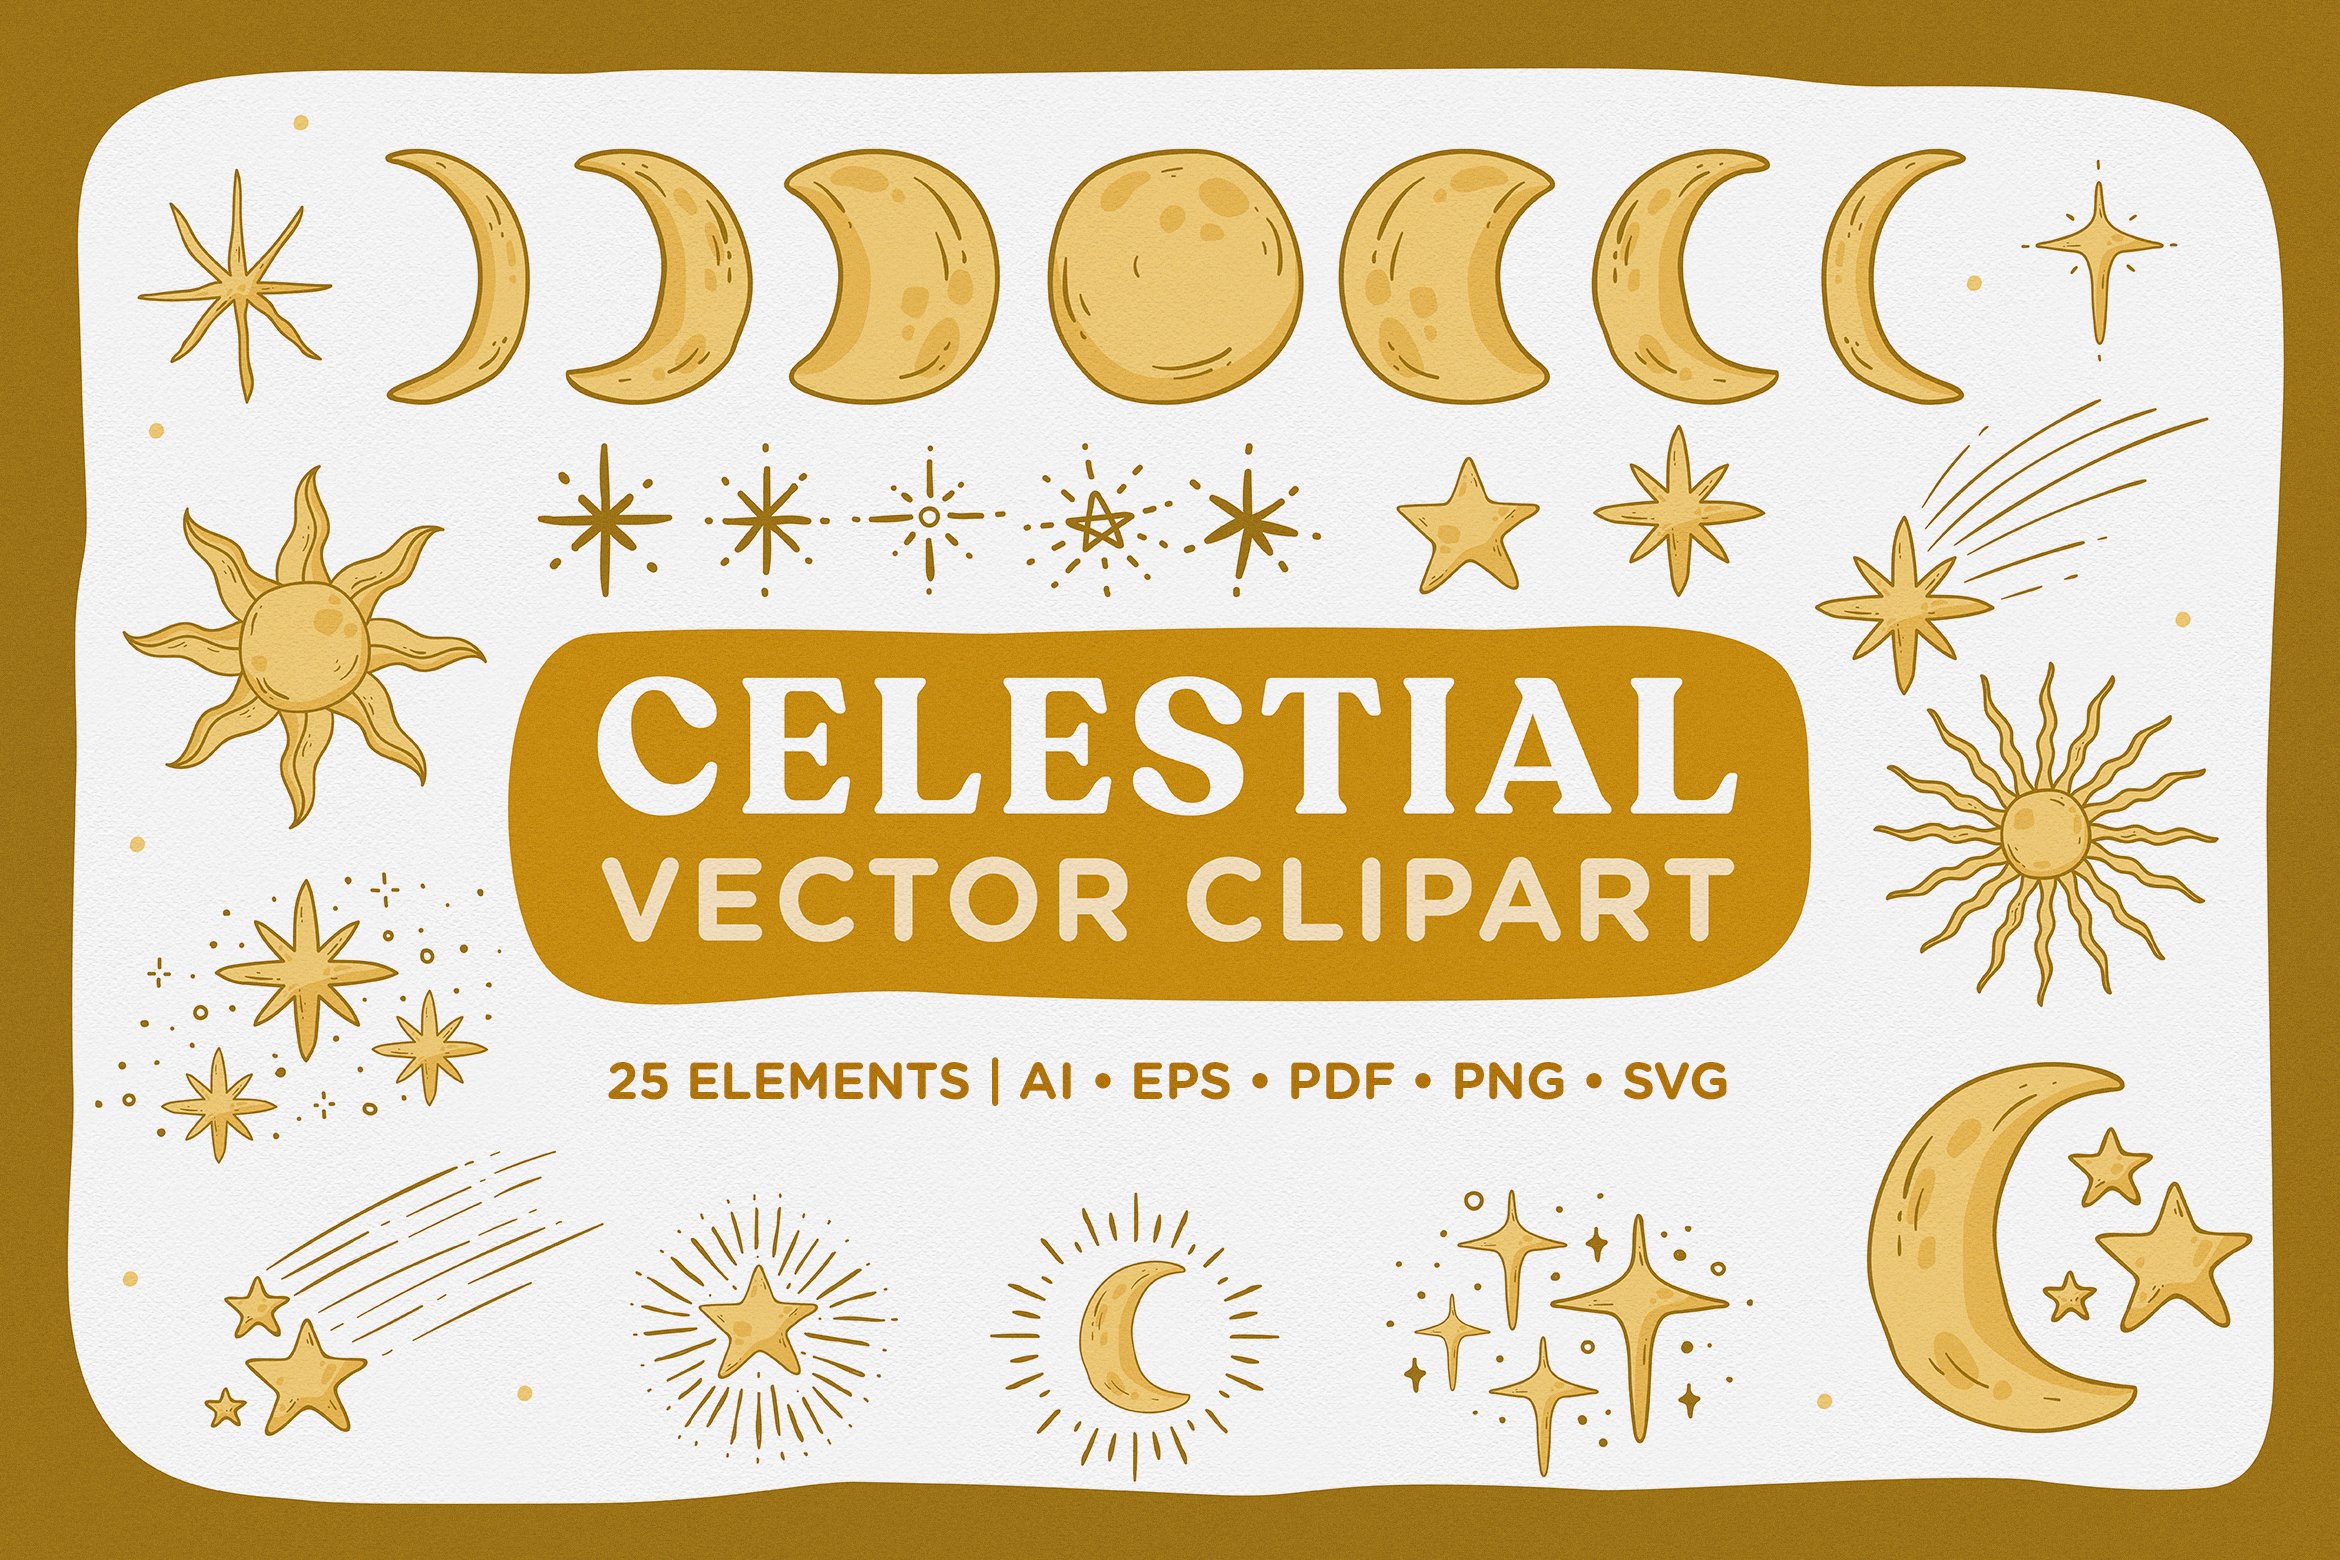 Cute Celestial Vector Clipart Pack cover image.